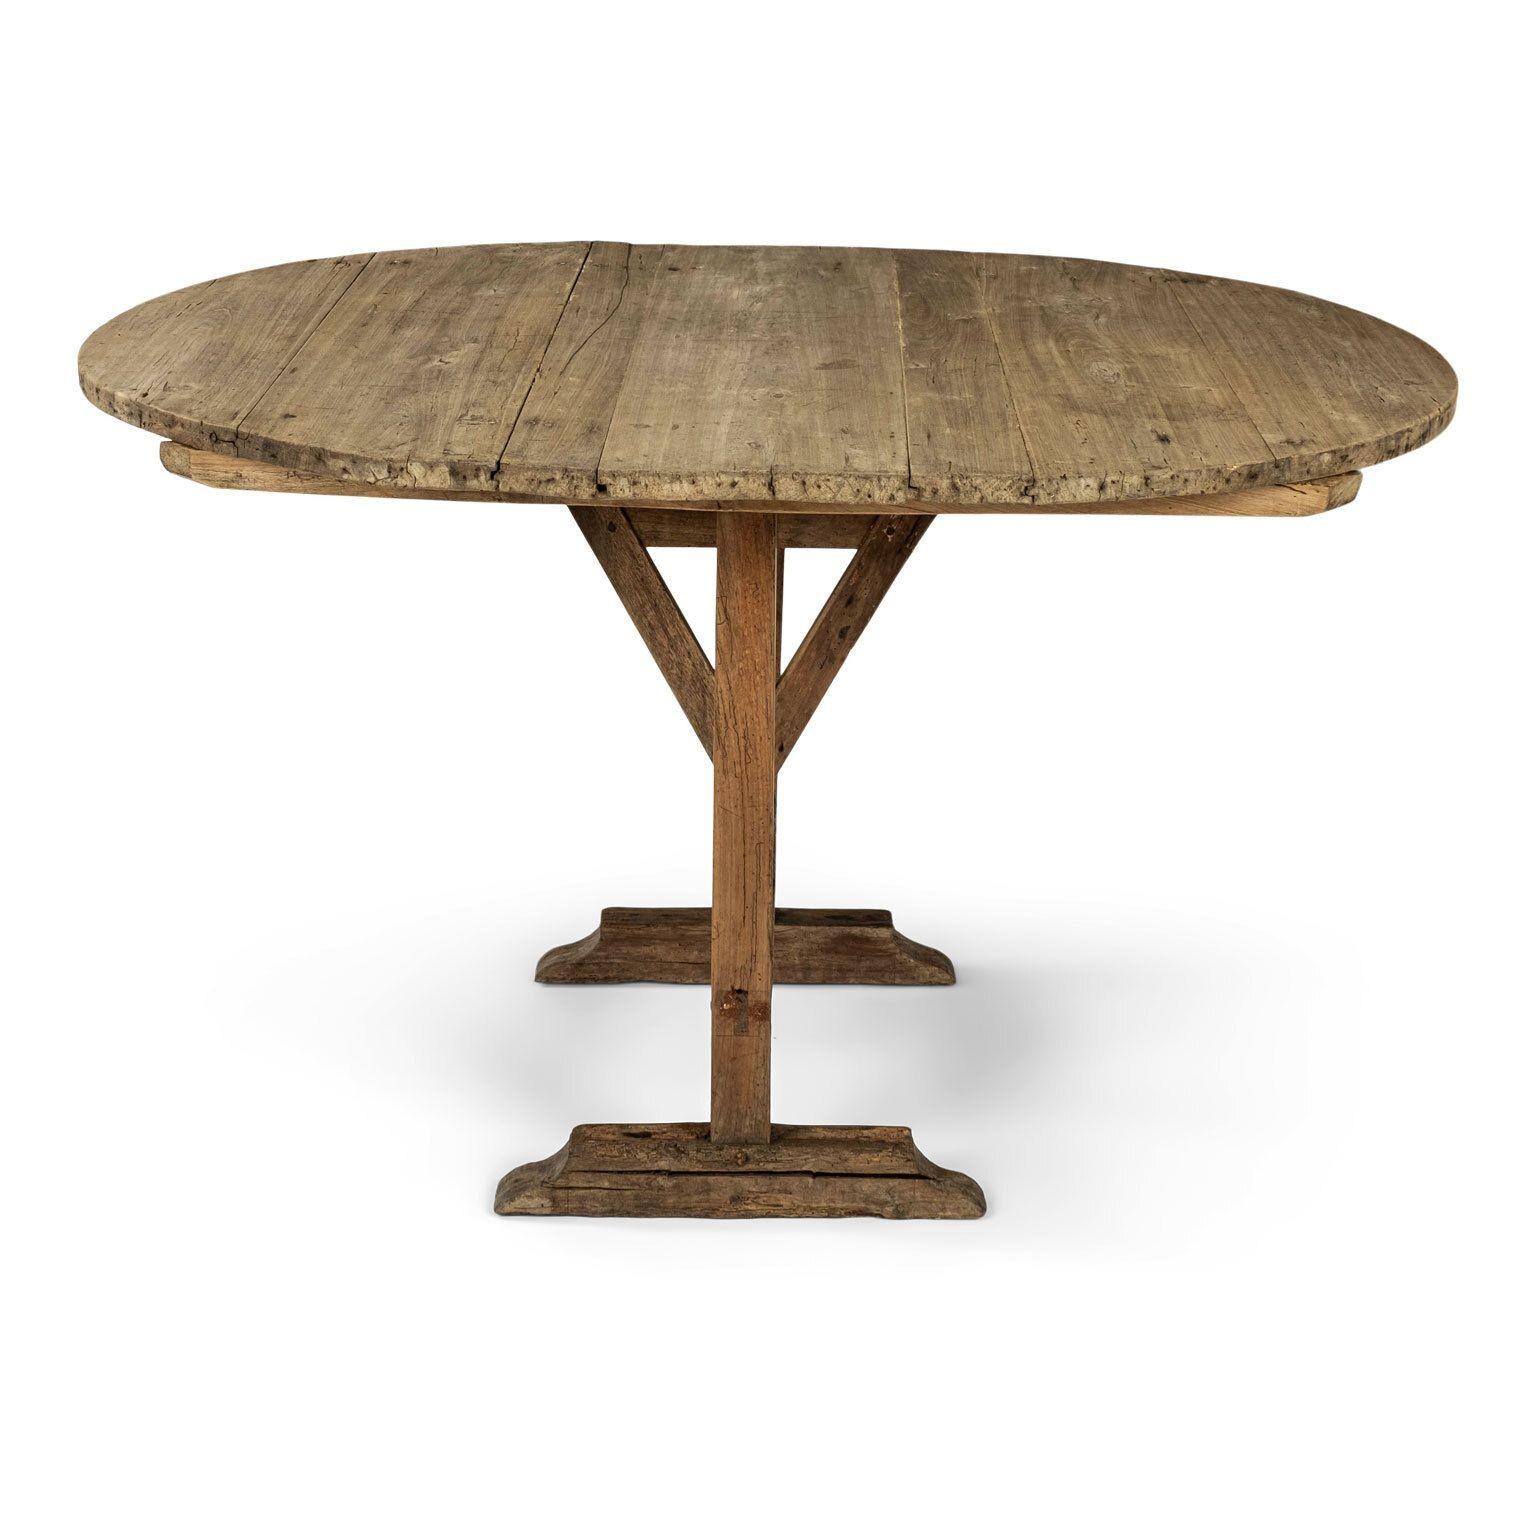 Rustic early sun-bleached oval-shape tilt-top table (circa 1830-1850). Simple, elegant design with functional tilt-top. Oval bleached walnut top raised upon bleached oak swivel-harp base. Jointed newly tightened. Sturdy, stable. Evidence of past